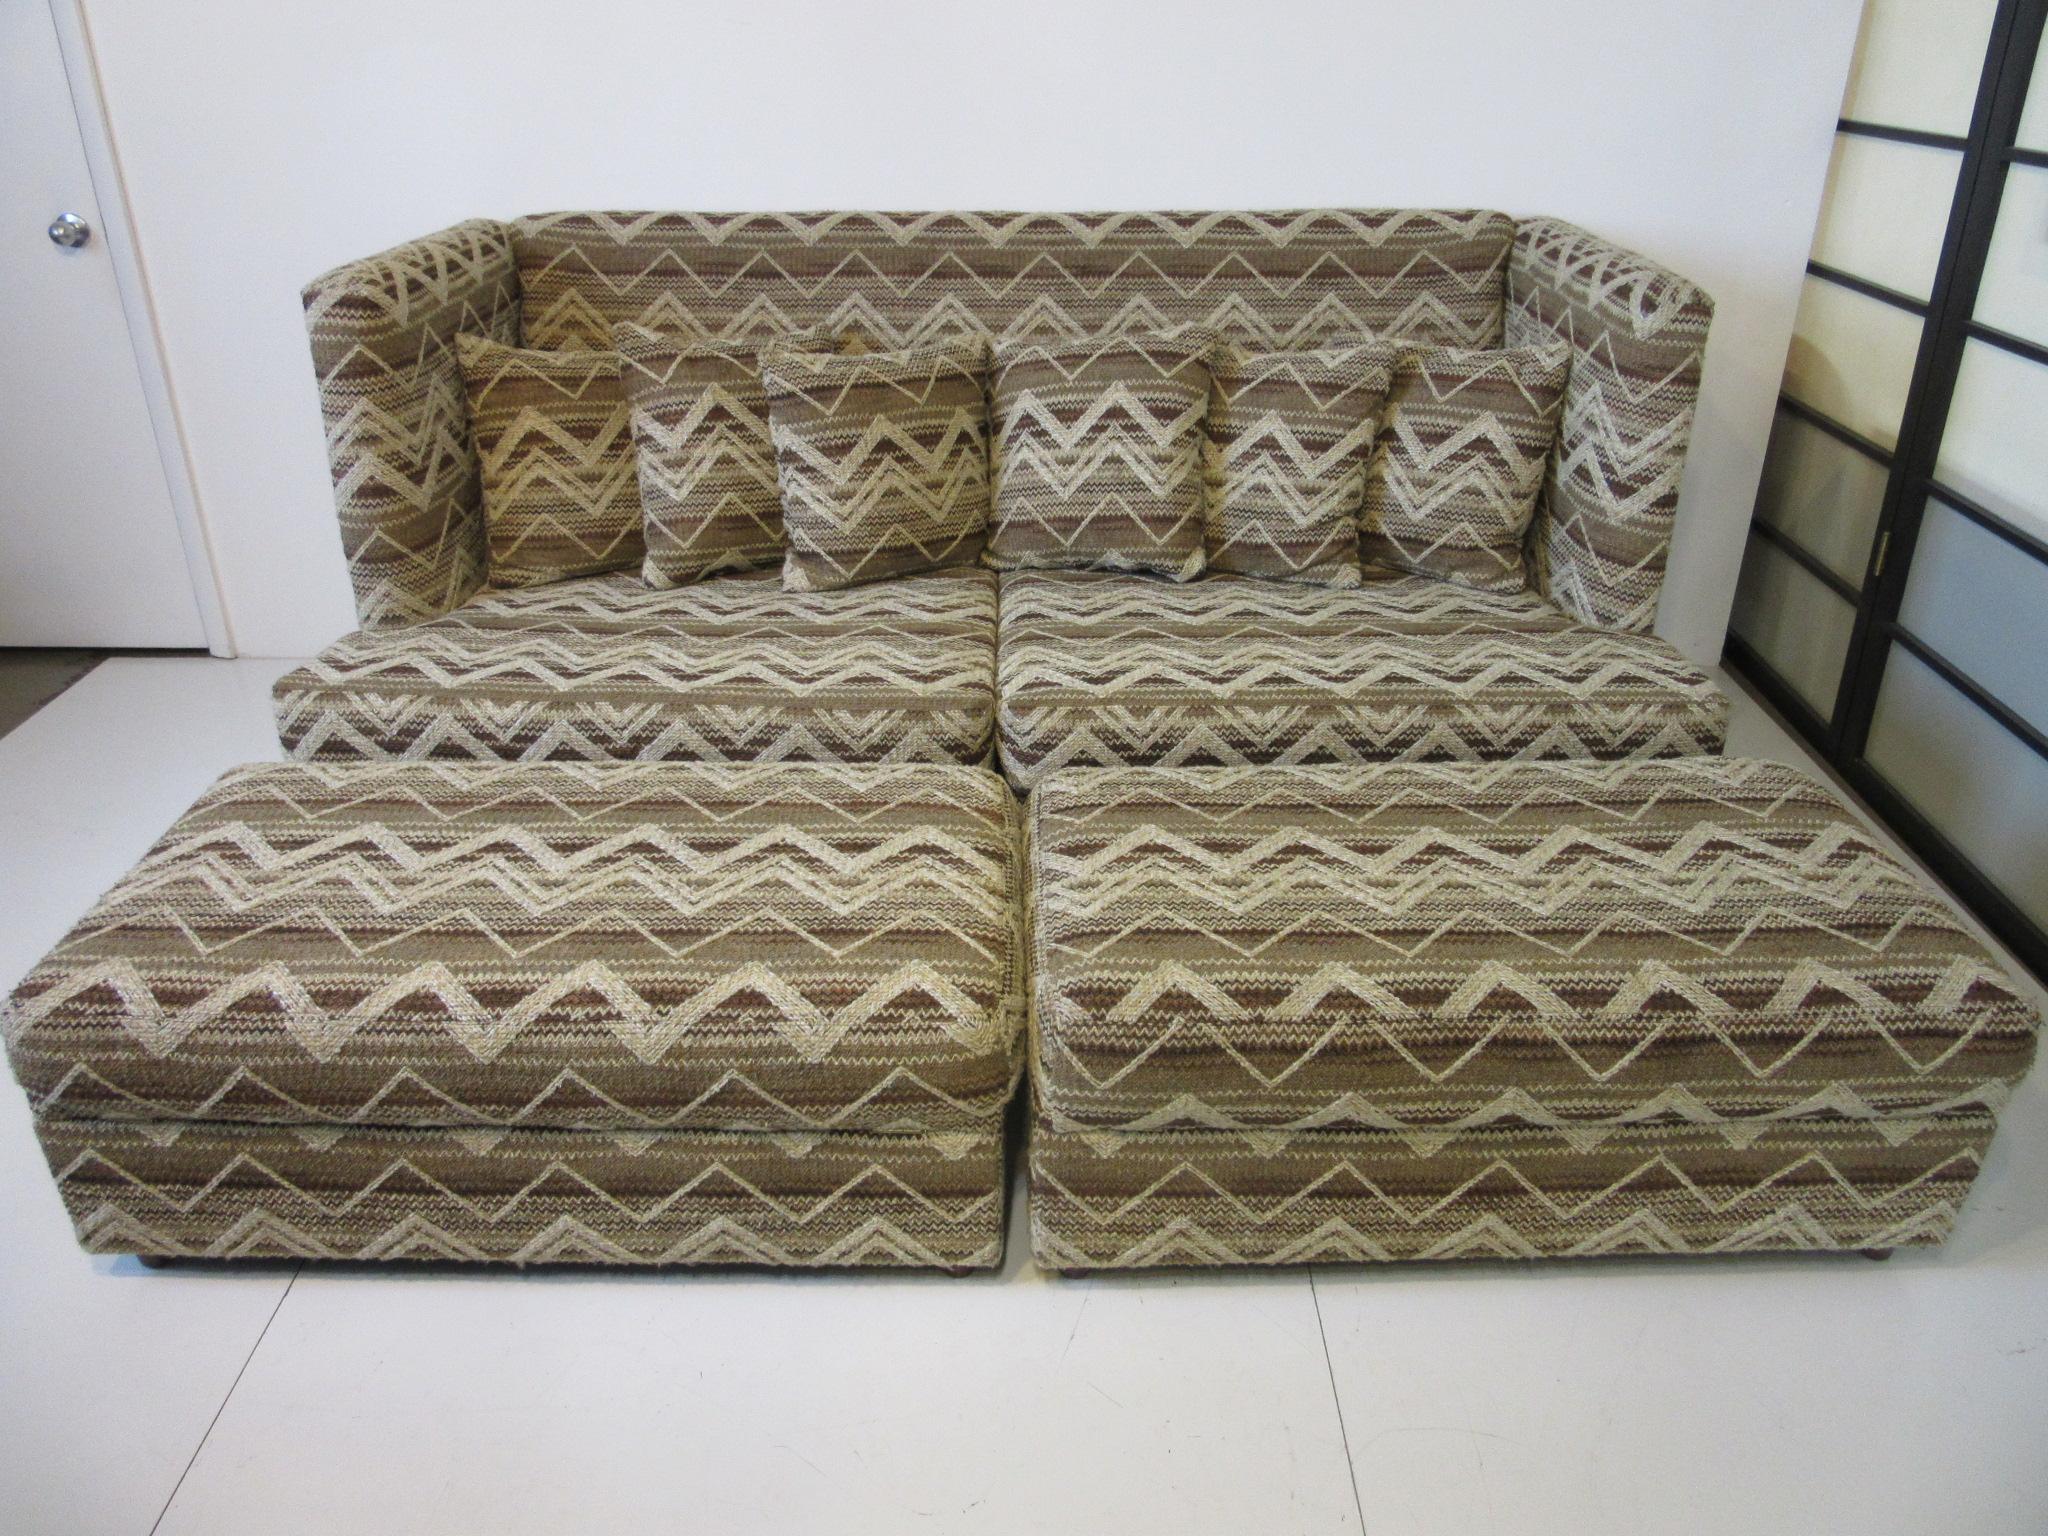 A hard to find Baughman shelter sofa with two matching storage ottomans, this sofa draws it's name for it cozy intimate sheltering feel with wall designed back and arms, six small throw pillows and large bottom cushion for quiet relaxation or